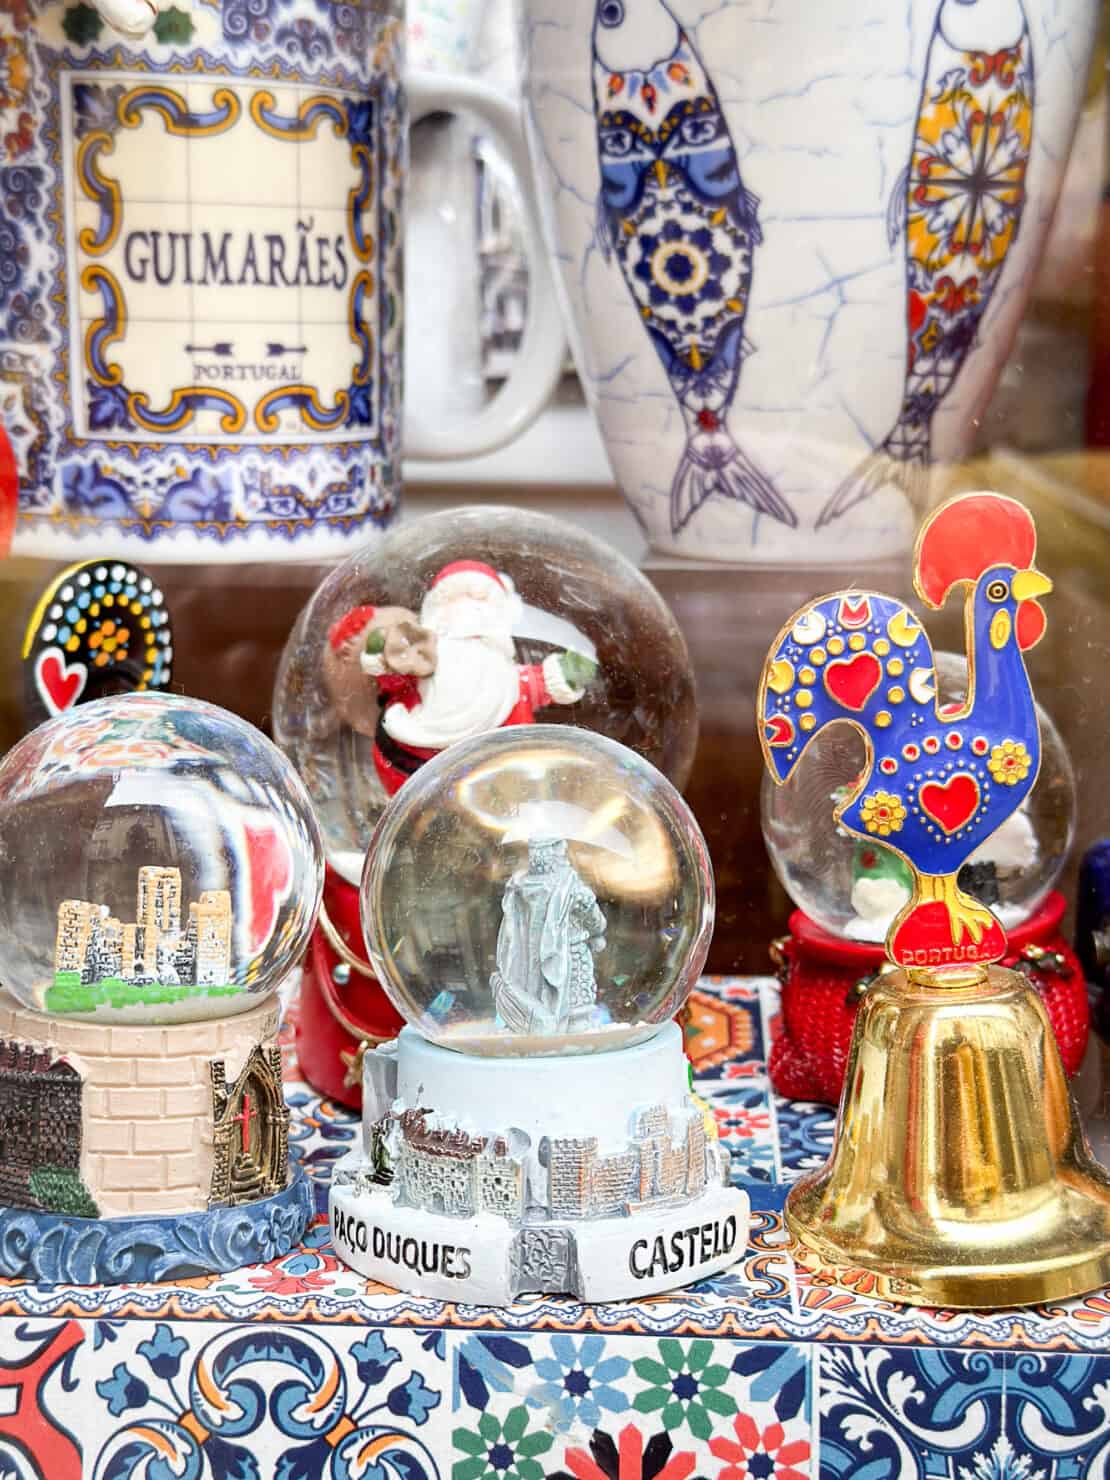 Snow globes and rooster souvenirs from Portugal